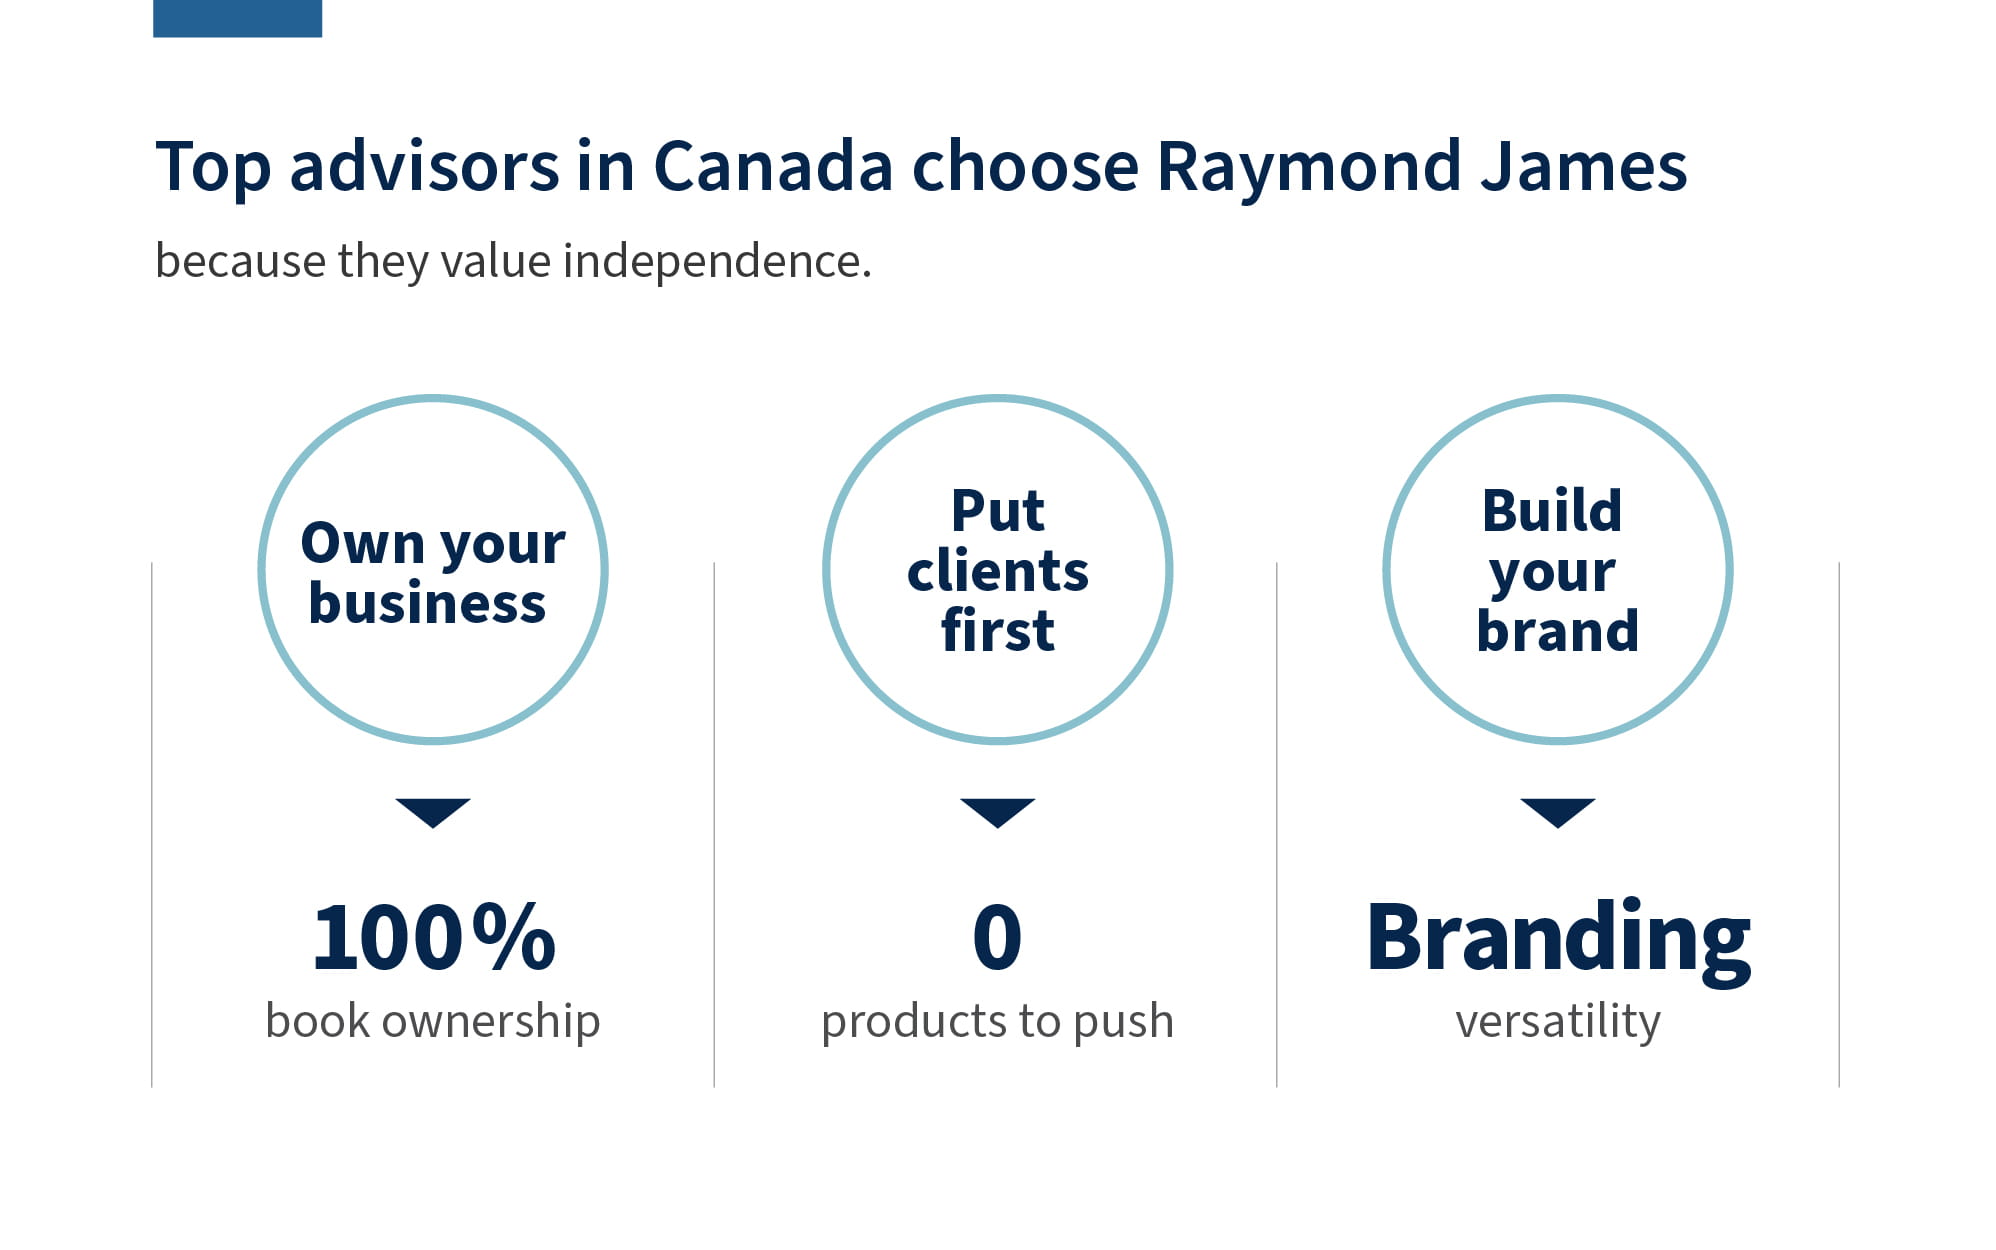 Top advisors in Canada choose Raymond James because they value independence. Own your business  100% book ownership Put clients first  0 products to push Build your brand   Branding versatility 